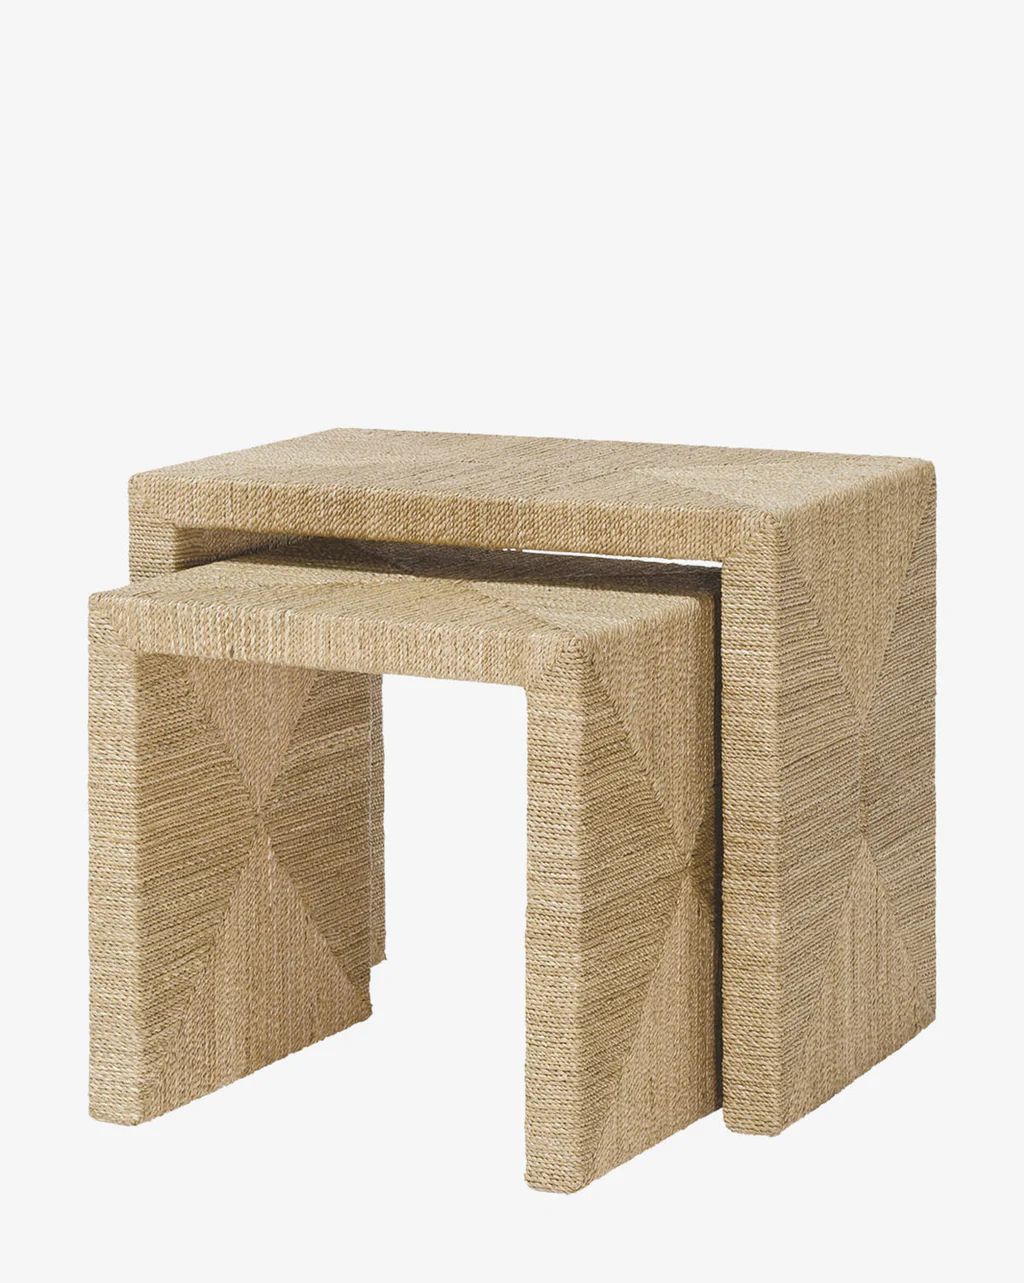 Ellie Nesting Side Tables | McGee & Co.